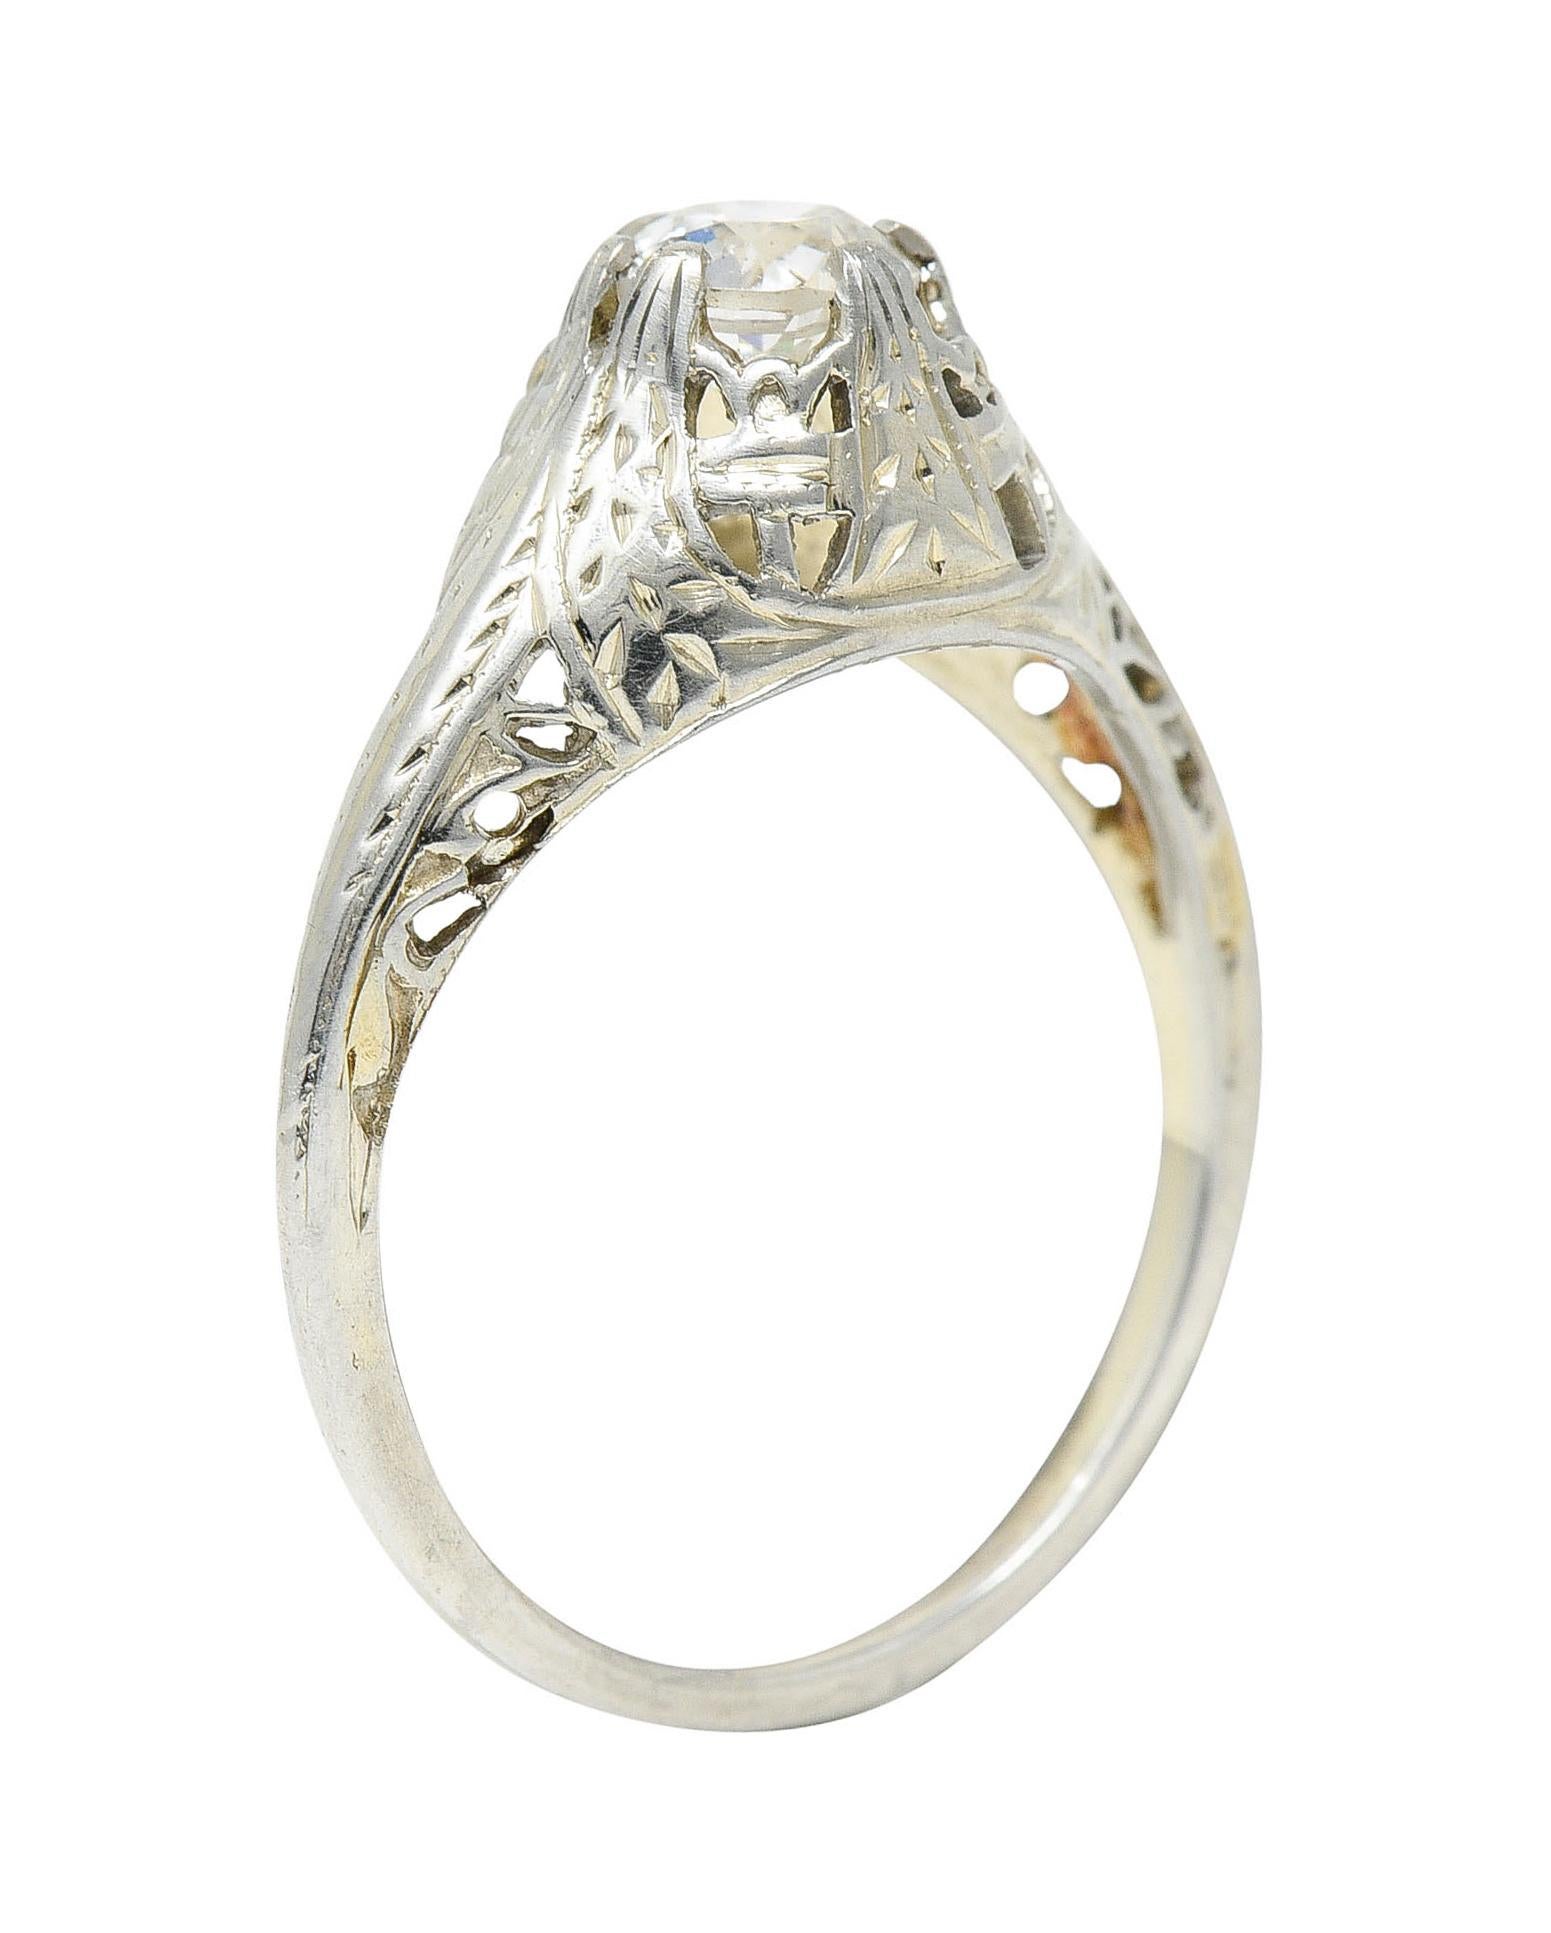 Featuring an old European cut diamond weighing approximately 0.52 carat - J/K color with VS2 clarity

Set by split and stylized foliate prongs in a pierced bombè mounting

Completed by whimsical foliate and floral designs

Stamped 18K for 18 karat